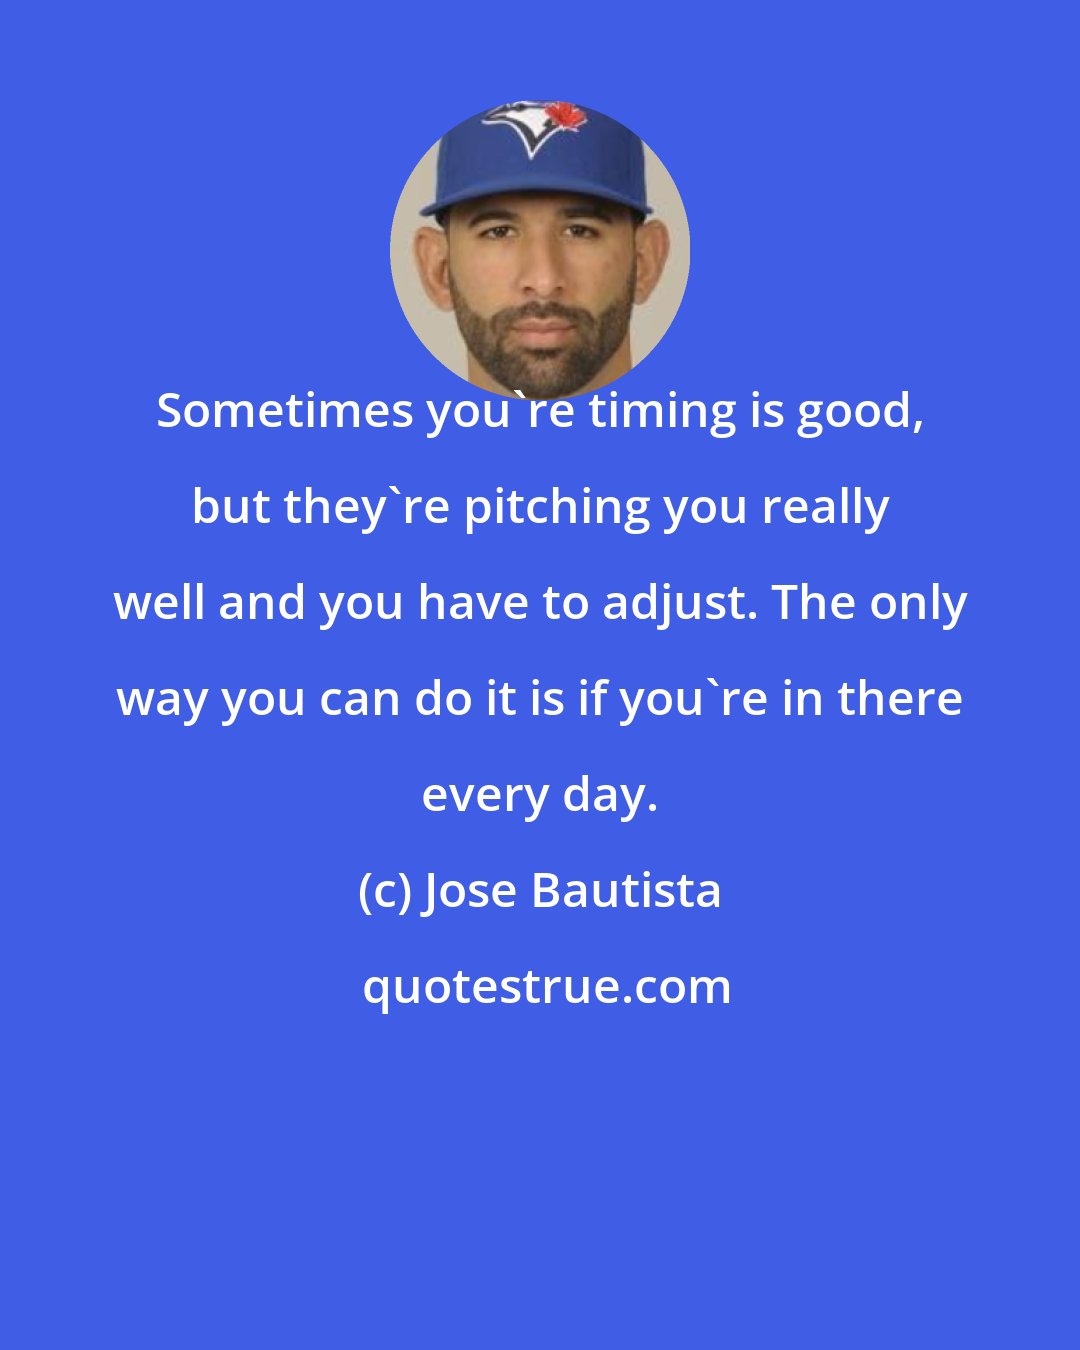 Jose Bautista: Sometimes you're timing is good, but they're pitching you really well and you have to adjust. The only way you can do it is if you're in there every day.